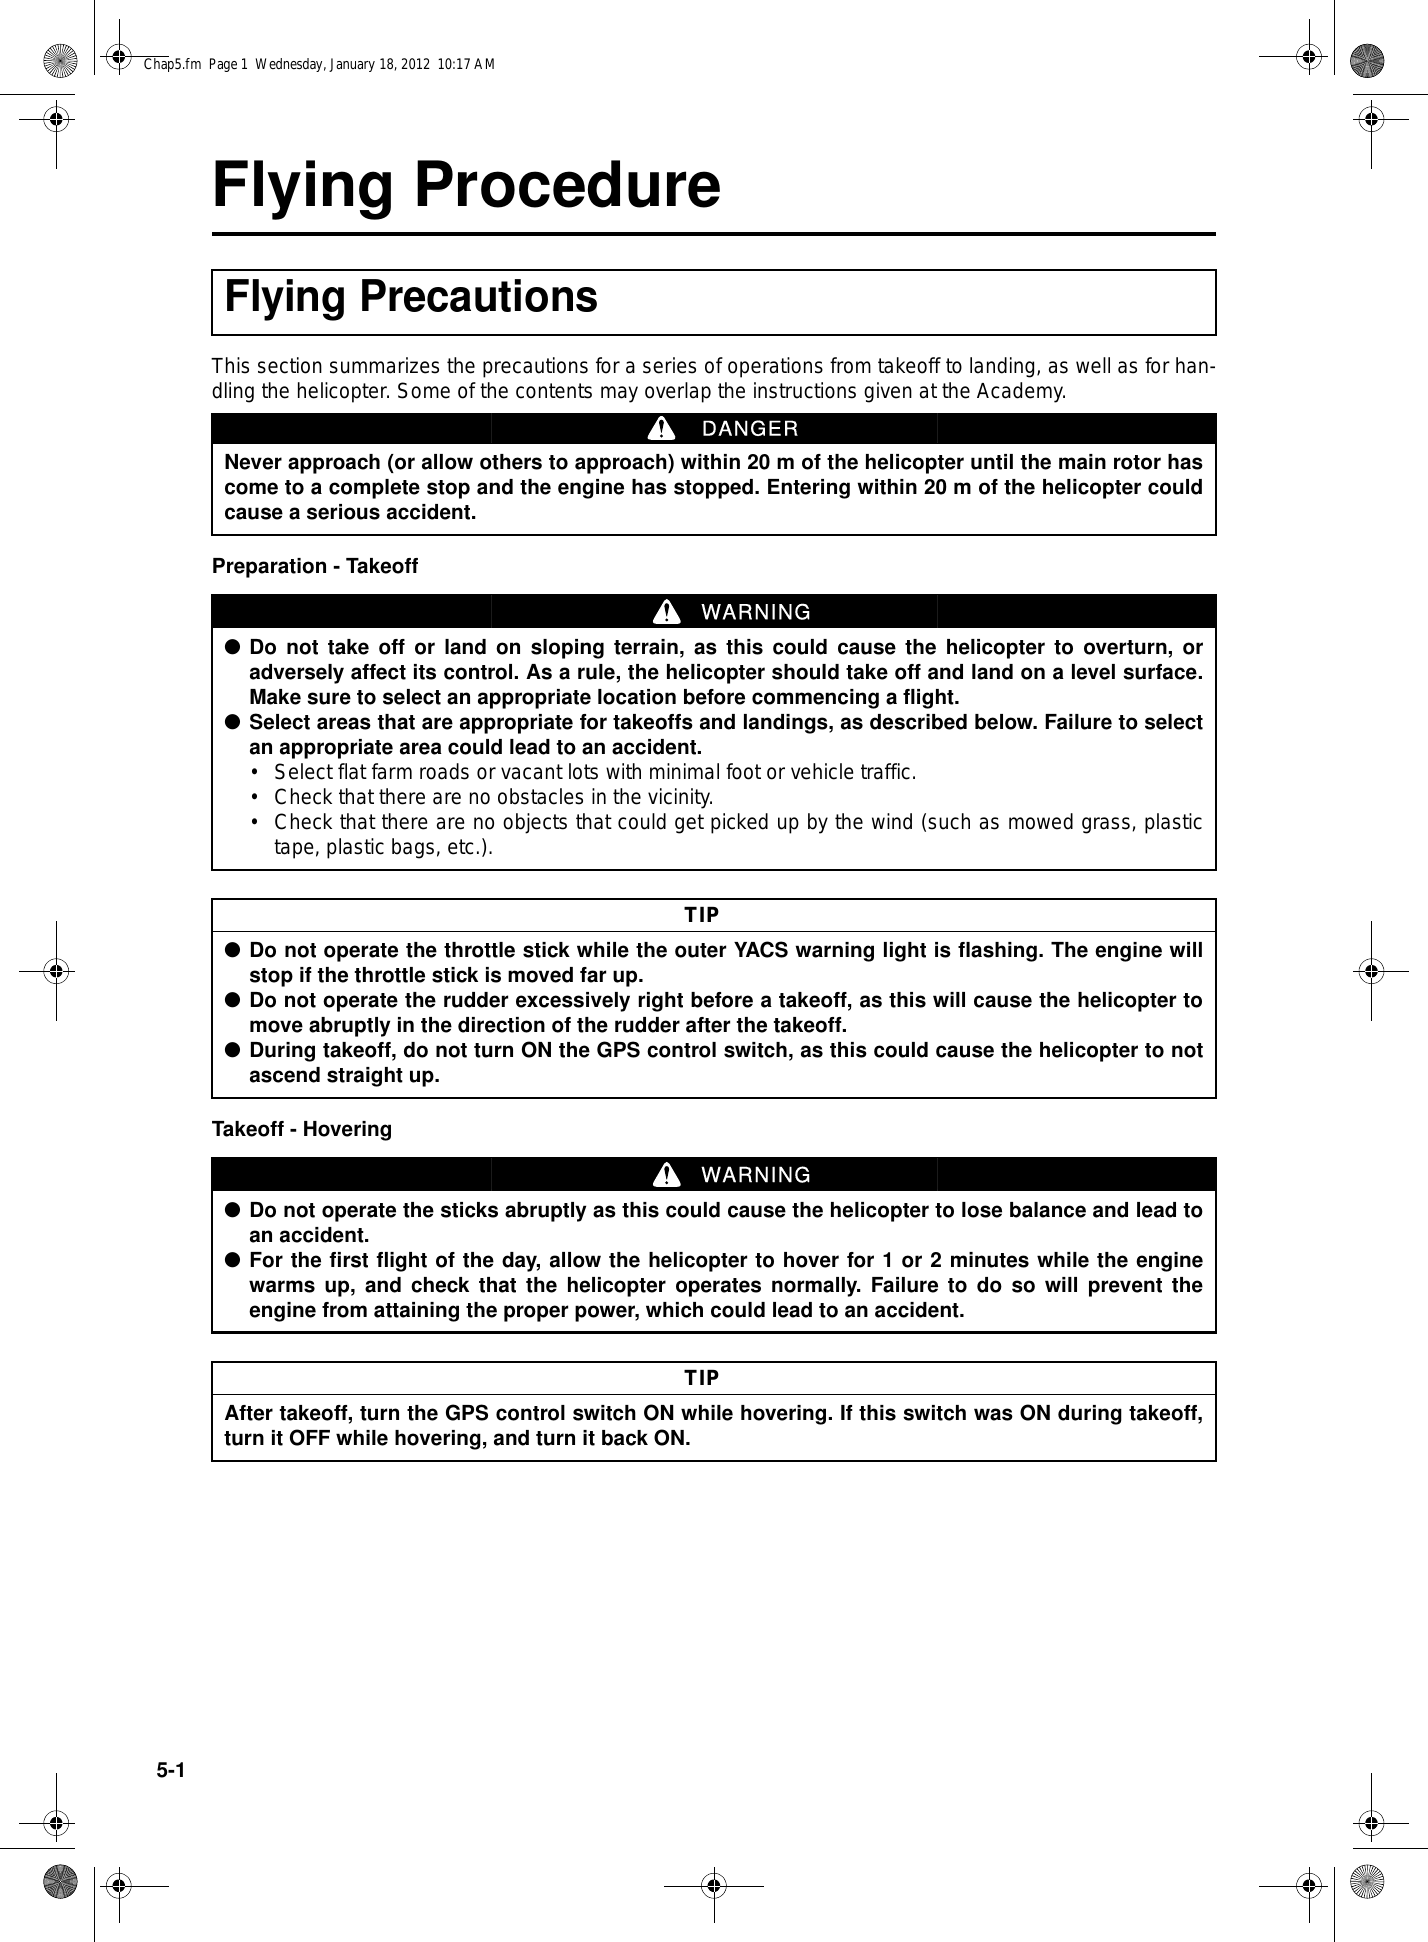 5-1Flying ProcedureThis section summarizes the precautions for a series of operations from takeoff to landing, as well as for han-dling the helicopter. Some of the contents may overlap the instructions given at the Academy.Preparation - TakeoffTakeoff - HoveringFlying PrecautionsNever approach (or allow others to approach) within 20 m of the helicopter until the main rotor hascome to a complete stop and the engine has stopped. Entering within 20 m of the helicopter couldcause a serious accident.DANGER●Do not take off or land on sloping terrain, as this could cause the helicopter to overturn, oradversely affect its control. As a rule, the helicopter should take off and land on a level surface.Make sure to select an appropriate location before commencing a flight.●Select areas that are appropriate for takeoffs and landings, as described below. Failure to selectan appropriate area could lead to an accident.• Select flat farm roads or vacant lots with minimal foot or vehicle traffic.• Check that there are no obstacles in the vicinity.• Check that there are no objects that could get picked up by the wind (such as mowed grass, plastictape, plastic bags, etc.).WARNING●Do not operate the throttle stick while the outer YACS warning light is flashing. The engine willstop if the throttle stick is moved far up.●Do not operate the rudder excessively right before a takeoff, as this will cause the helicopter tomove abruptly in the direction of the rudder after the takeoff.●During takeoff, do not turn ON the GPS control switch, as this could cause the helicopter to notascend straight up.TIP●Do not operate the sticks abruptly as this could cause the helicopter to lose balance and lead toan accident.●For the first flight of the day, allow the helicopter to hover for 1 or 2 minutes while the enginewarms up, and check that the helicopter operates normally. Failure to do so will prevent theengine from attaining the proper power, which could lead to an accident.WARNINGAfter takeoff, turn the GPS control switch ON while hovering. If this switch was ON during takeoff,turn it OFF while hovering, and turn it back ON.TIPChap5.fm  Page 1  Wednesday, January 18, 2012  10:17 AM